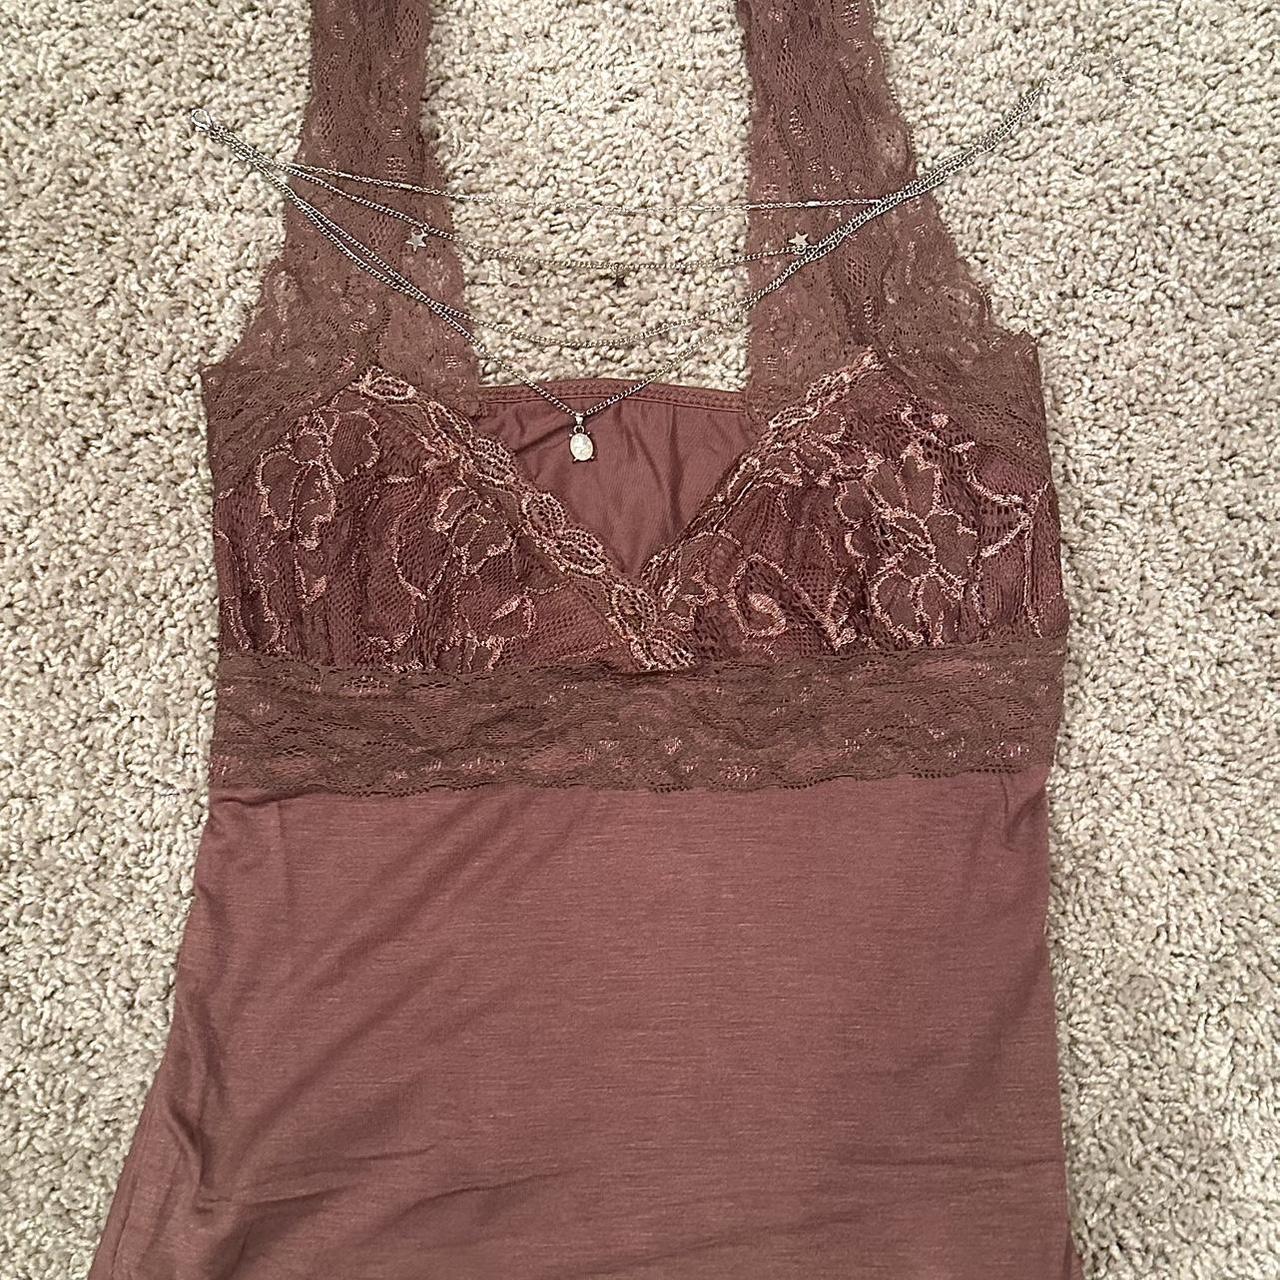 A brand new top lace tank. - Depop